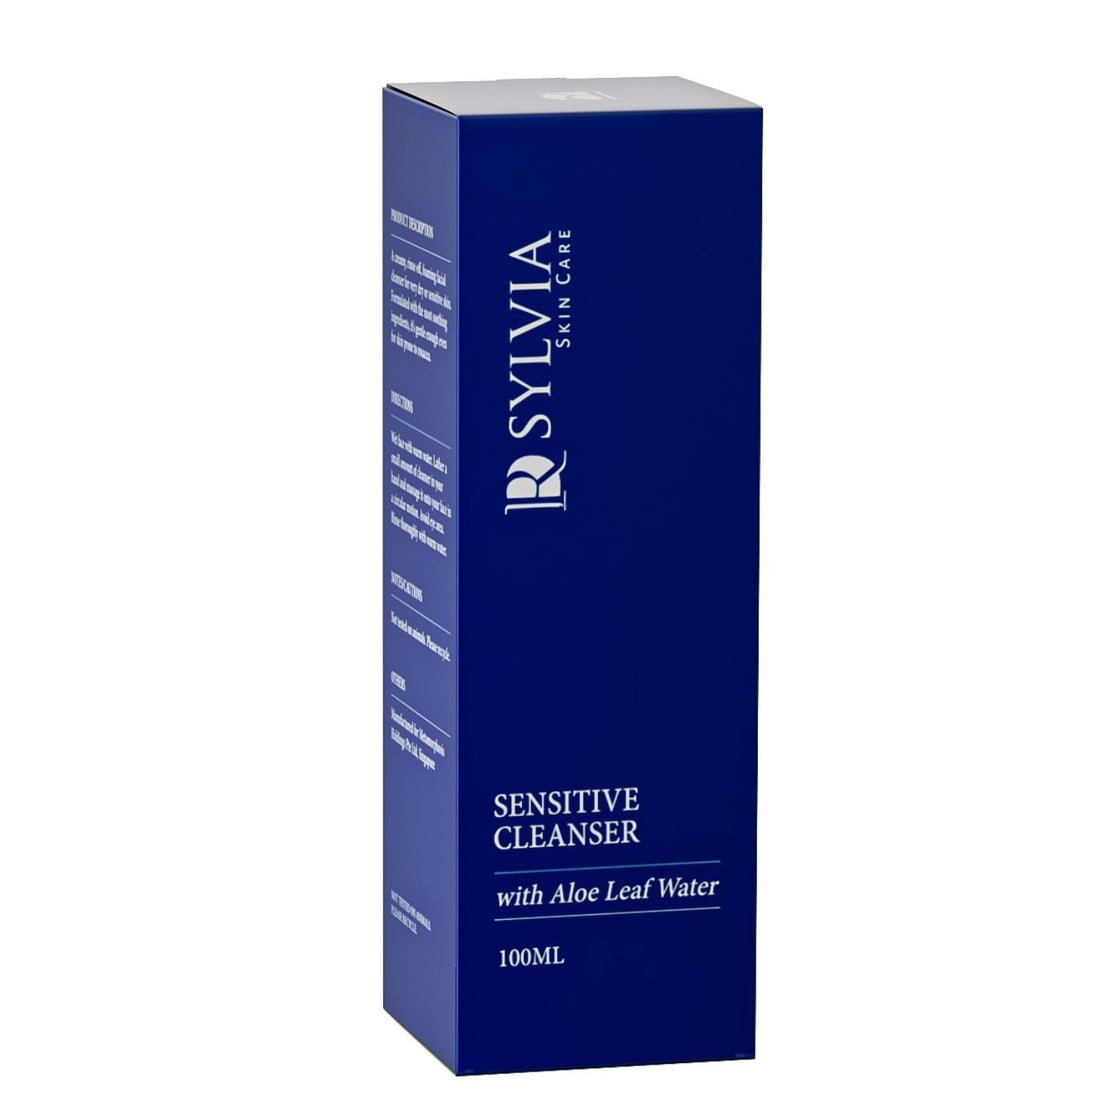 Sensitive Cleanser with Aloe Leaf Water